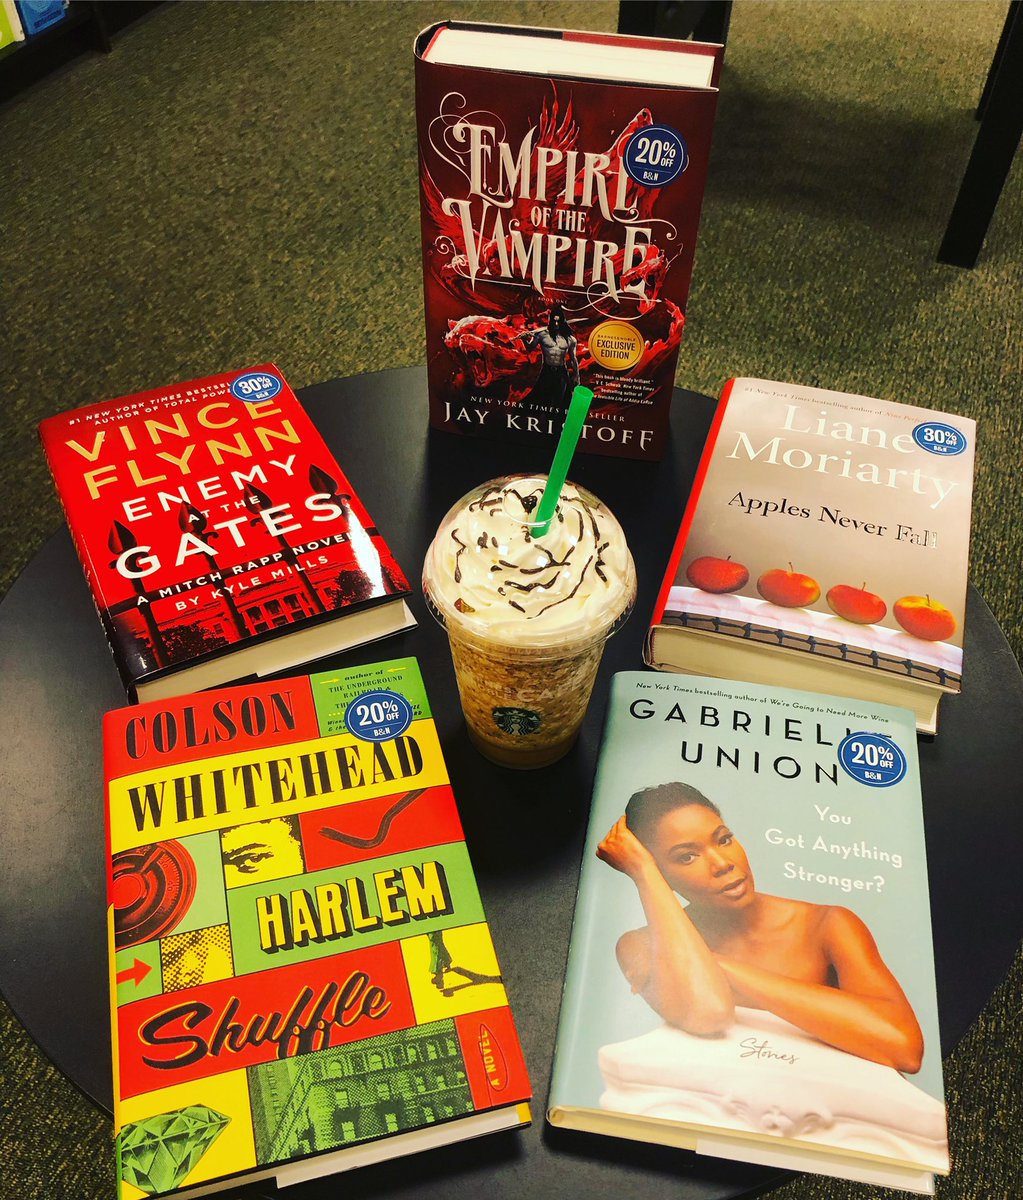 Tuesdays are for new releases! #newreleasetuesday #newbooks #booksarelife #bnbuzz #frappuccino #bncafe #bngulfportrecommends #bngulfport #readmorebooks #shopmississippi